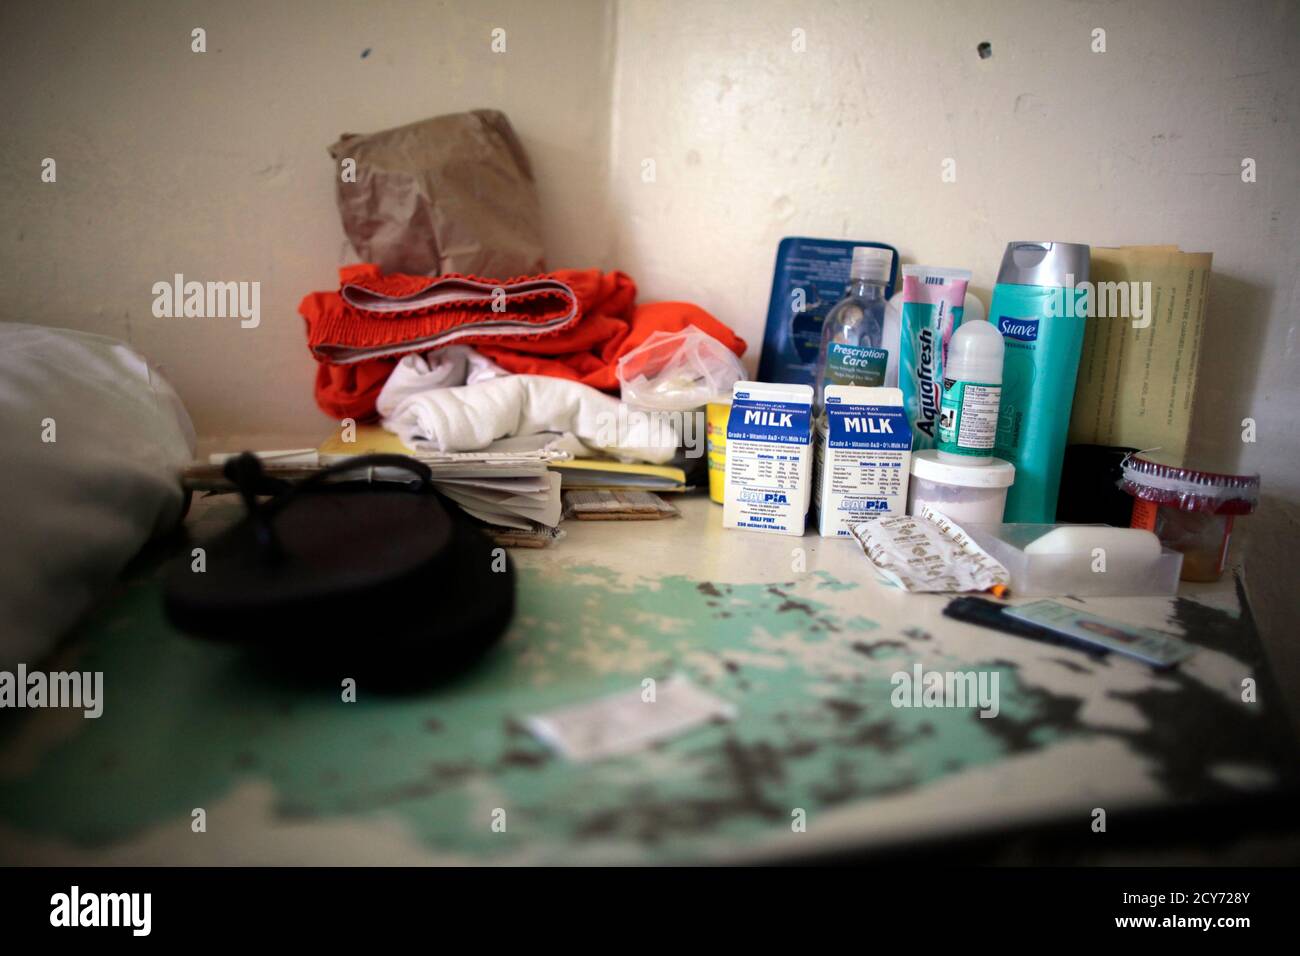 An inmate's possessions are seen in his cell at the California Institution for Men state prison in Chino, California, June 3, 2011.  The Supreme Court has ordered California to release more than 30,000 inmates over the next two years or take other steps to ease overcrowding in its prisons to prevent 'needless suffering and death.' California's 33 adult prisons were designed to hold about 80,000 inmates and now have about 145,000. The United States has more than 2 million people in state and local prisons. It has long had the highest incarceration rate in the world. REUTERS/Lucy Nicholson (UNIT Stock Photo